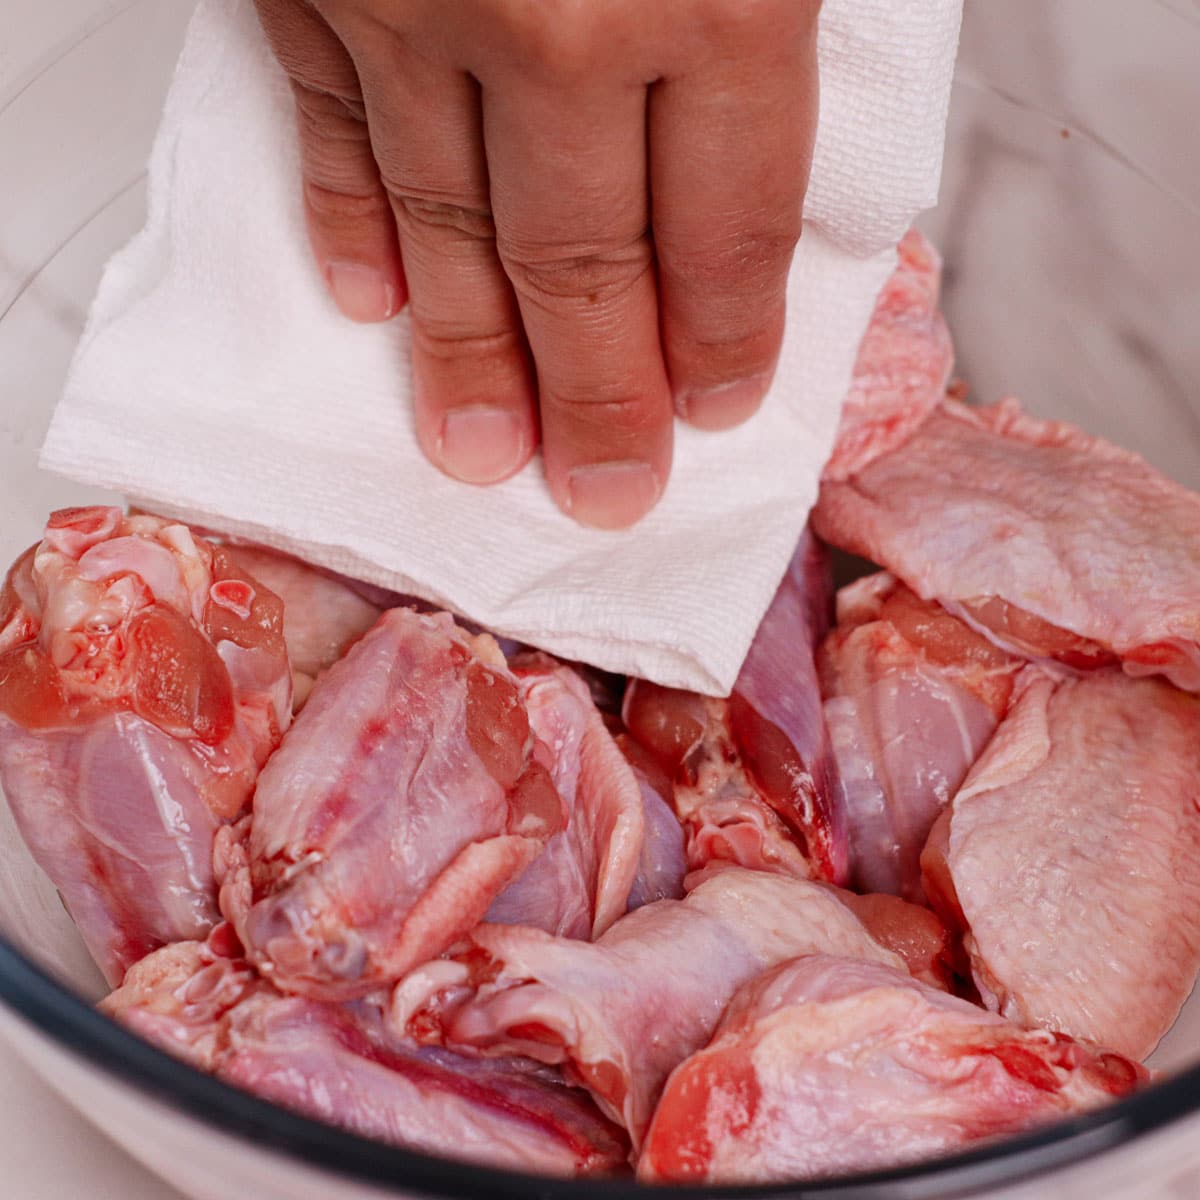 Patting chicken wings dry with paper towel.